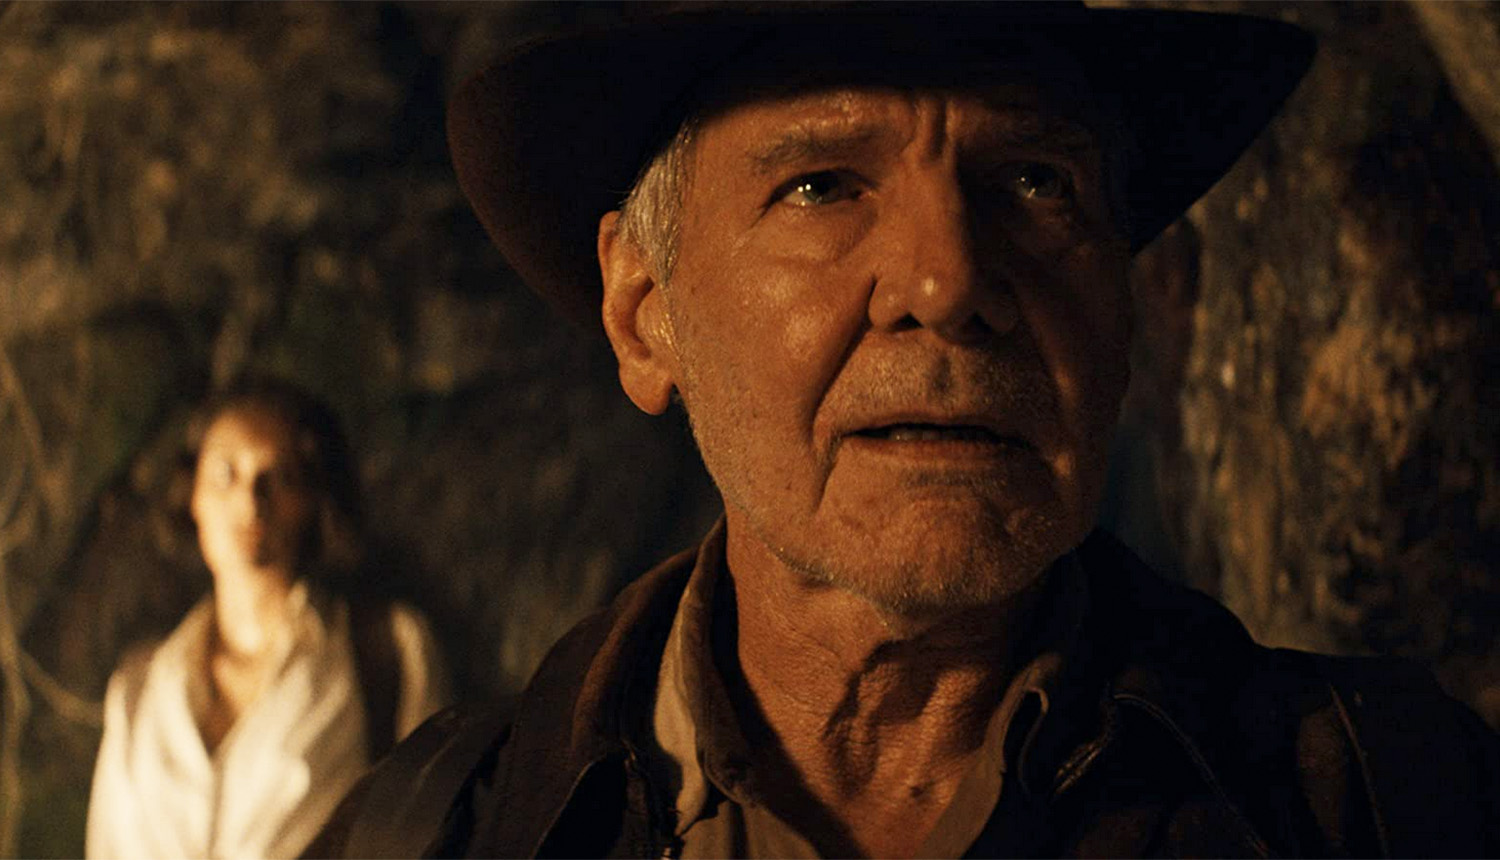 Why You Should See 'Indiana Jones and the Dial of Destiny